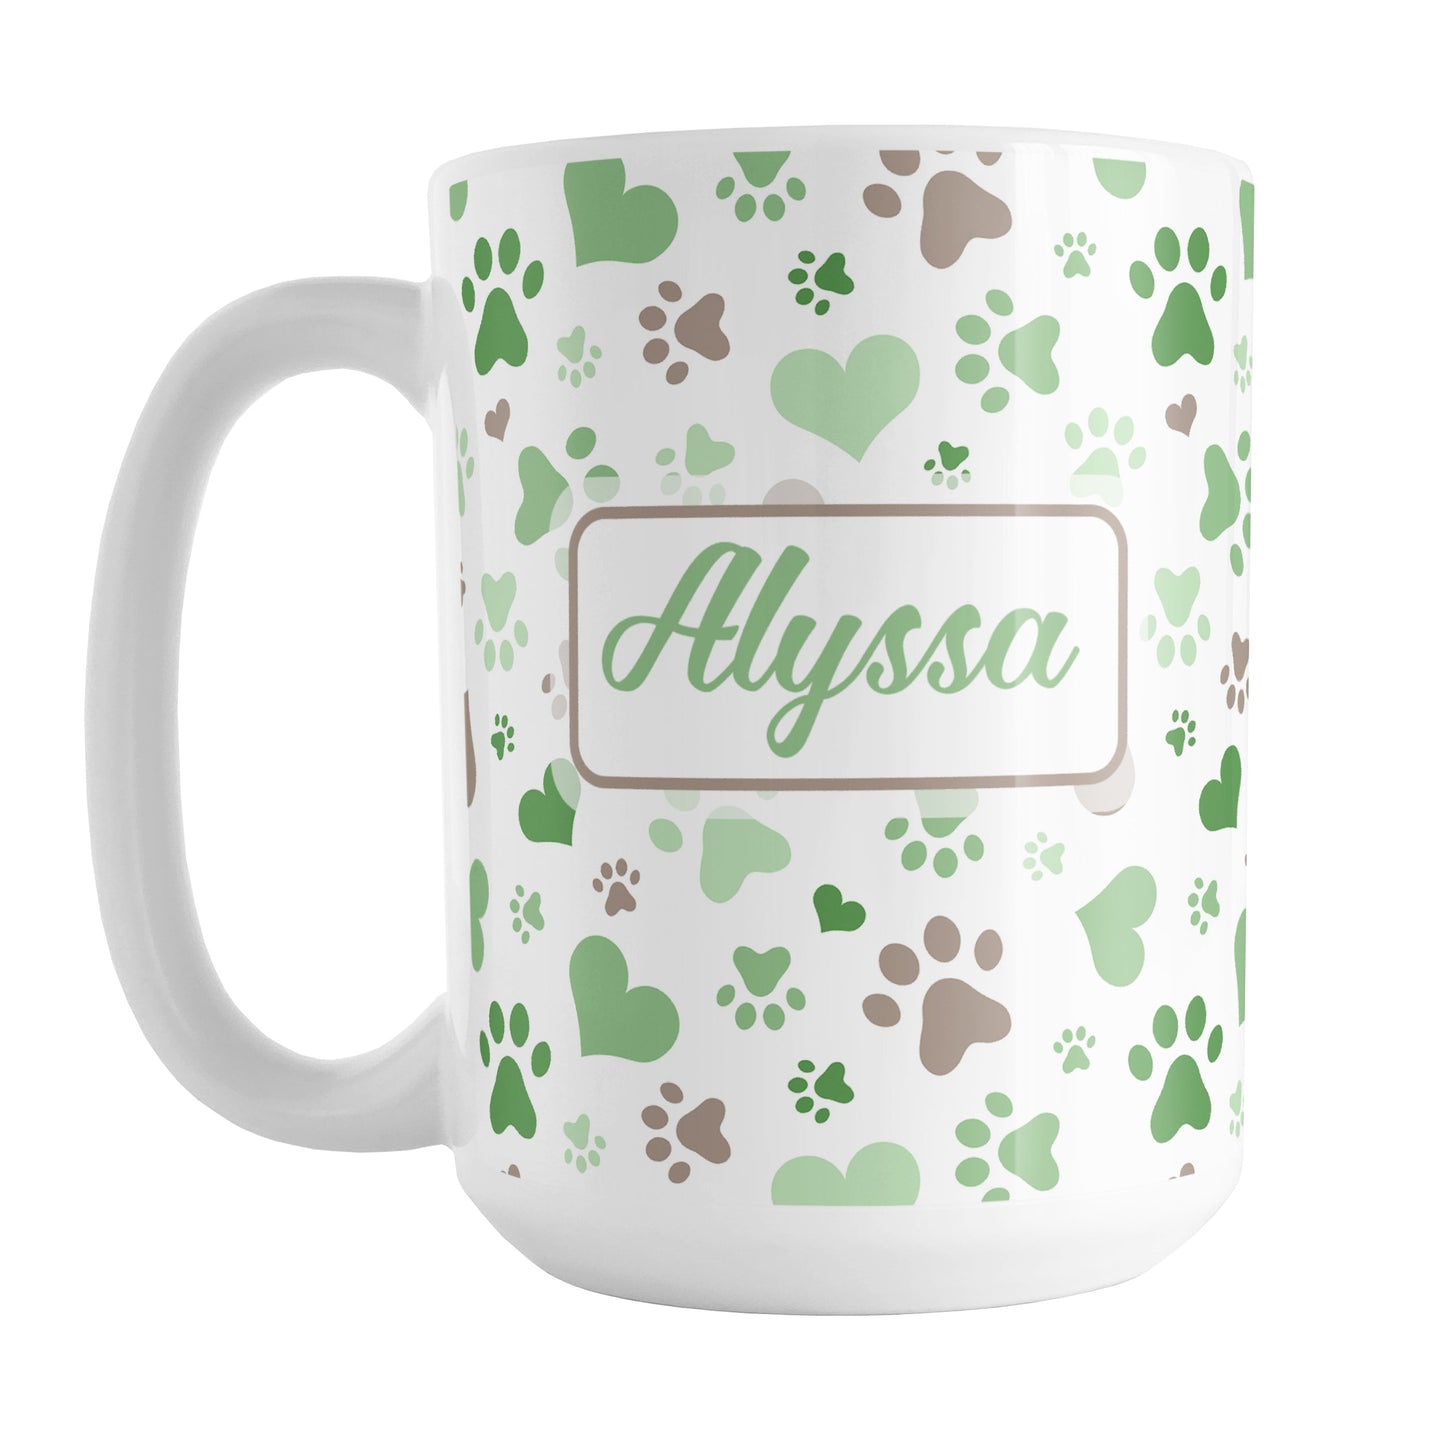 Personalized Green Hearts and Paw Prints Mug (15oz) at Amy's Coffee Mugs. A ceramic coffee mug designed with a pattern of hearts and paw prints in green and brown that wraps around the mug to the handle. Your name is personalized in green on both sides of the mug.